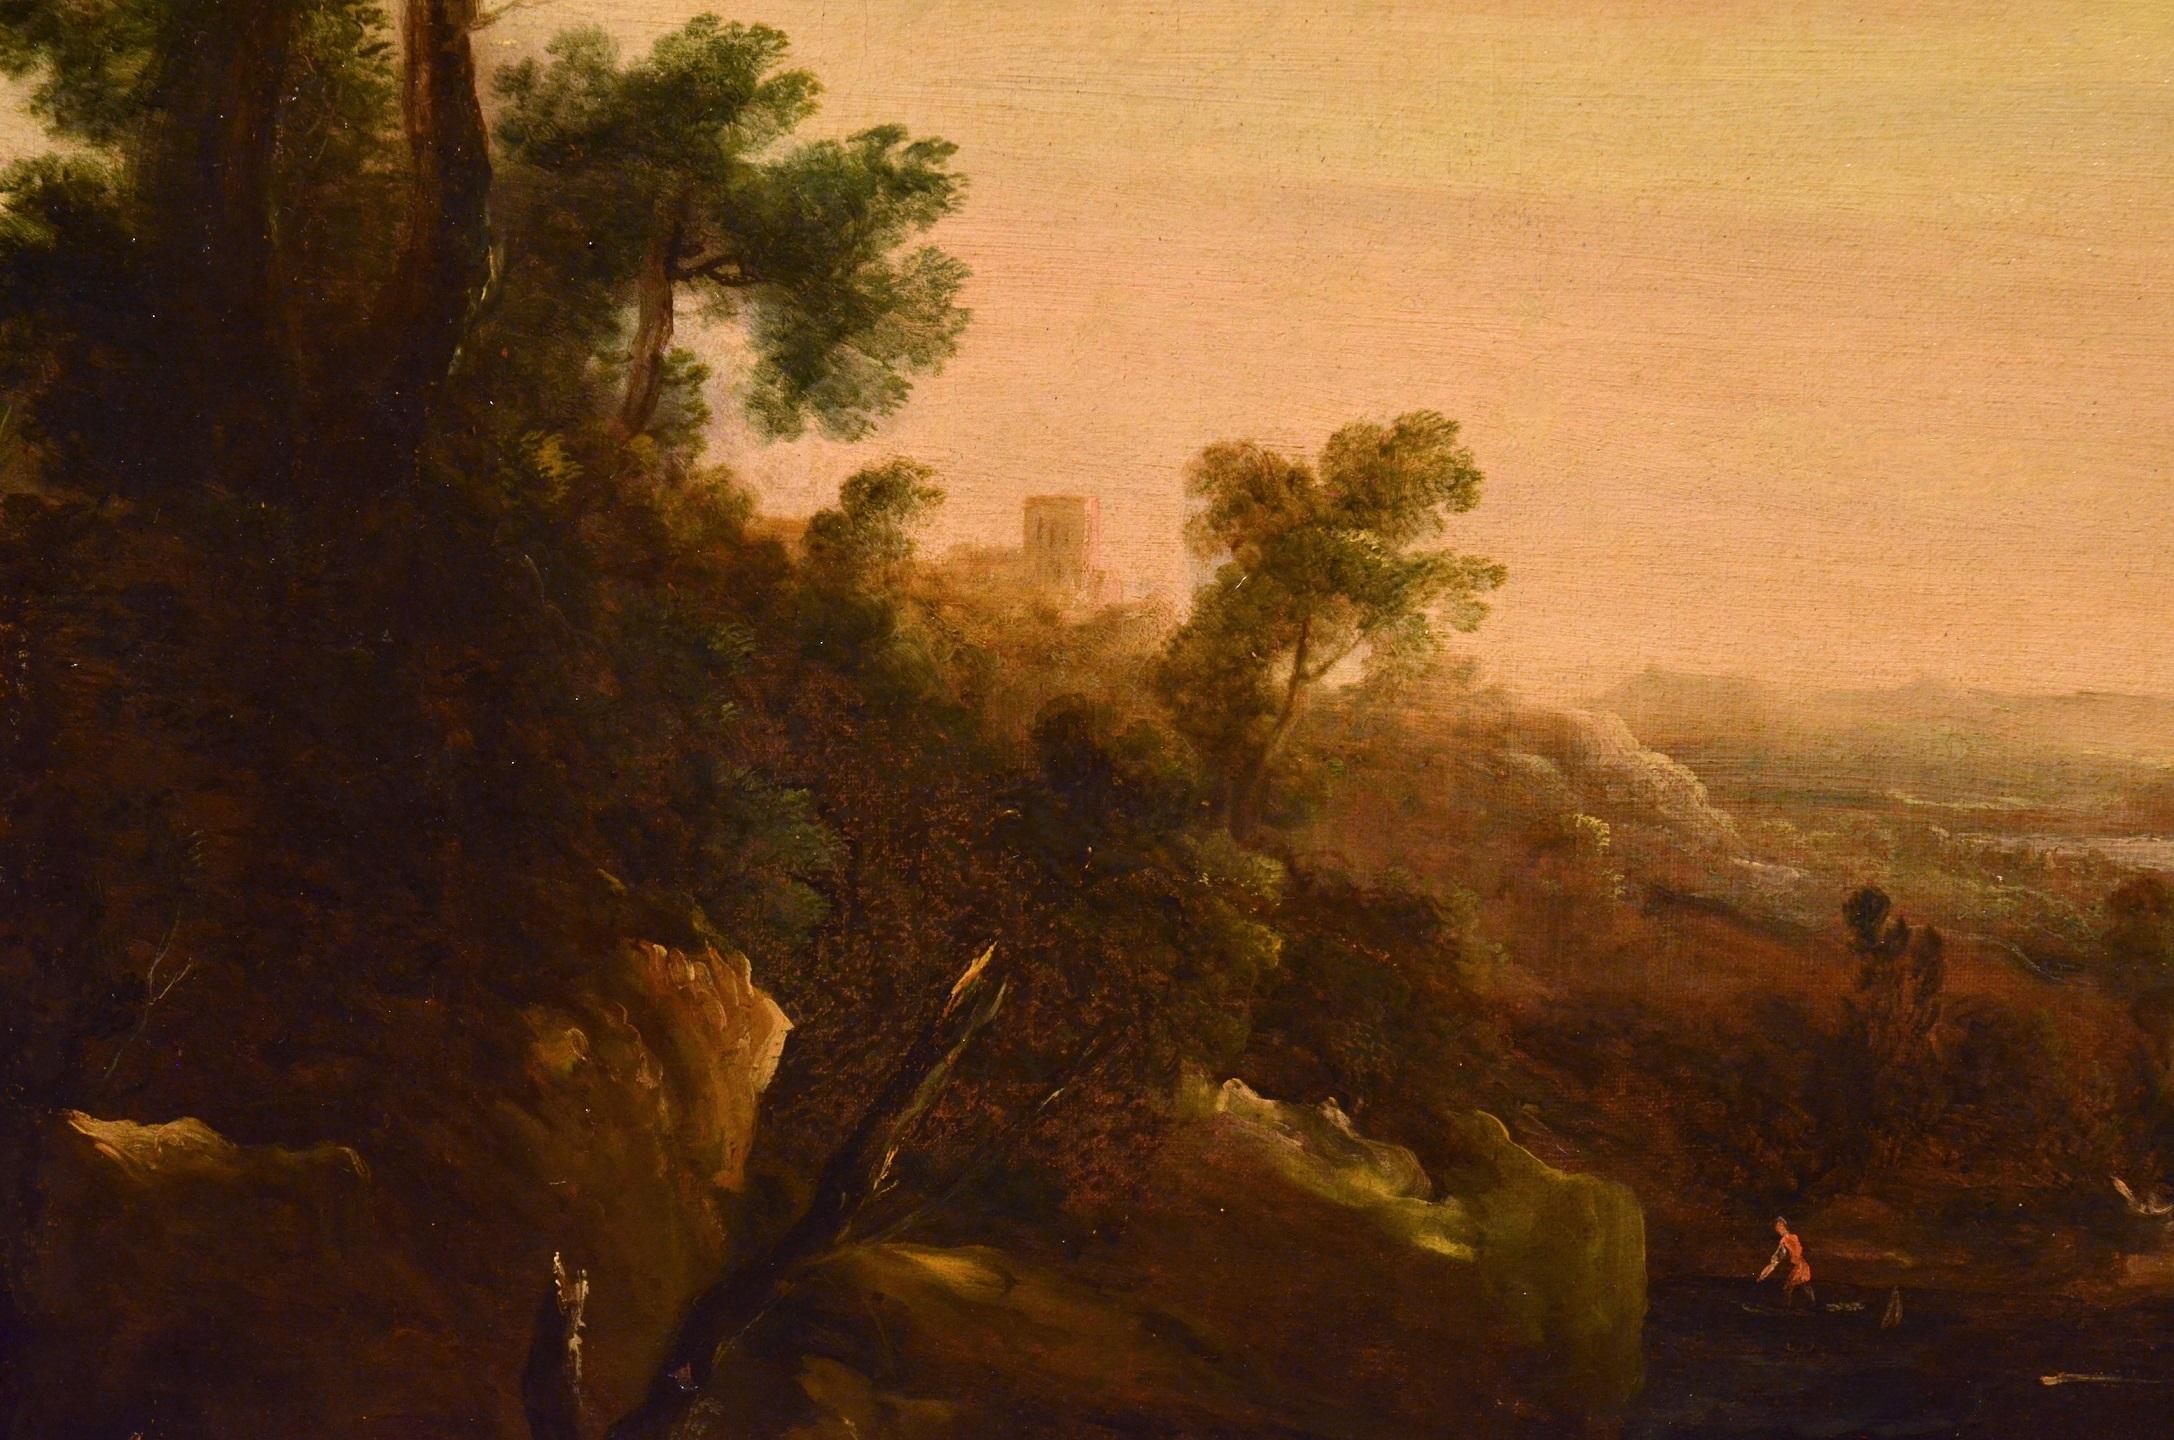 Paint Oil on canvas 17th Century Wood Landscape Temple Italy Old master Roma Art - Brown Landscape Painting by Pierre-Antoine Patel (Paris 1648 - 1707), attributable to